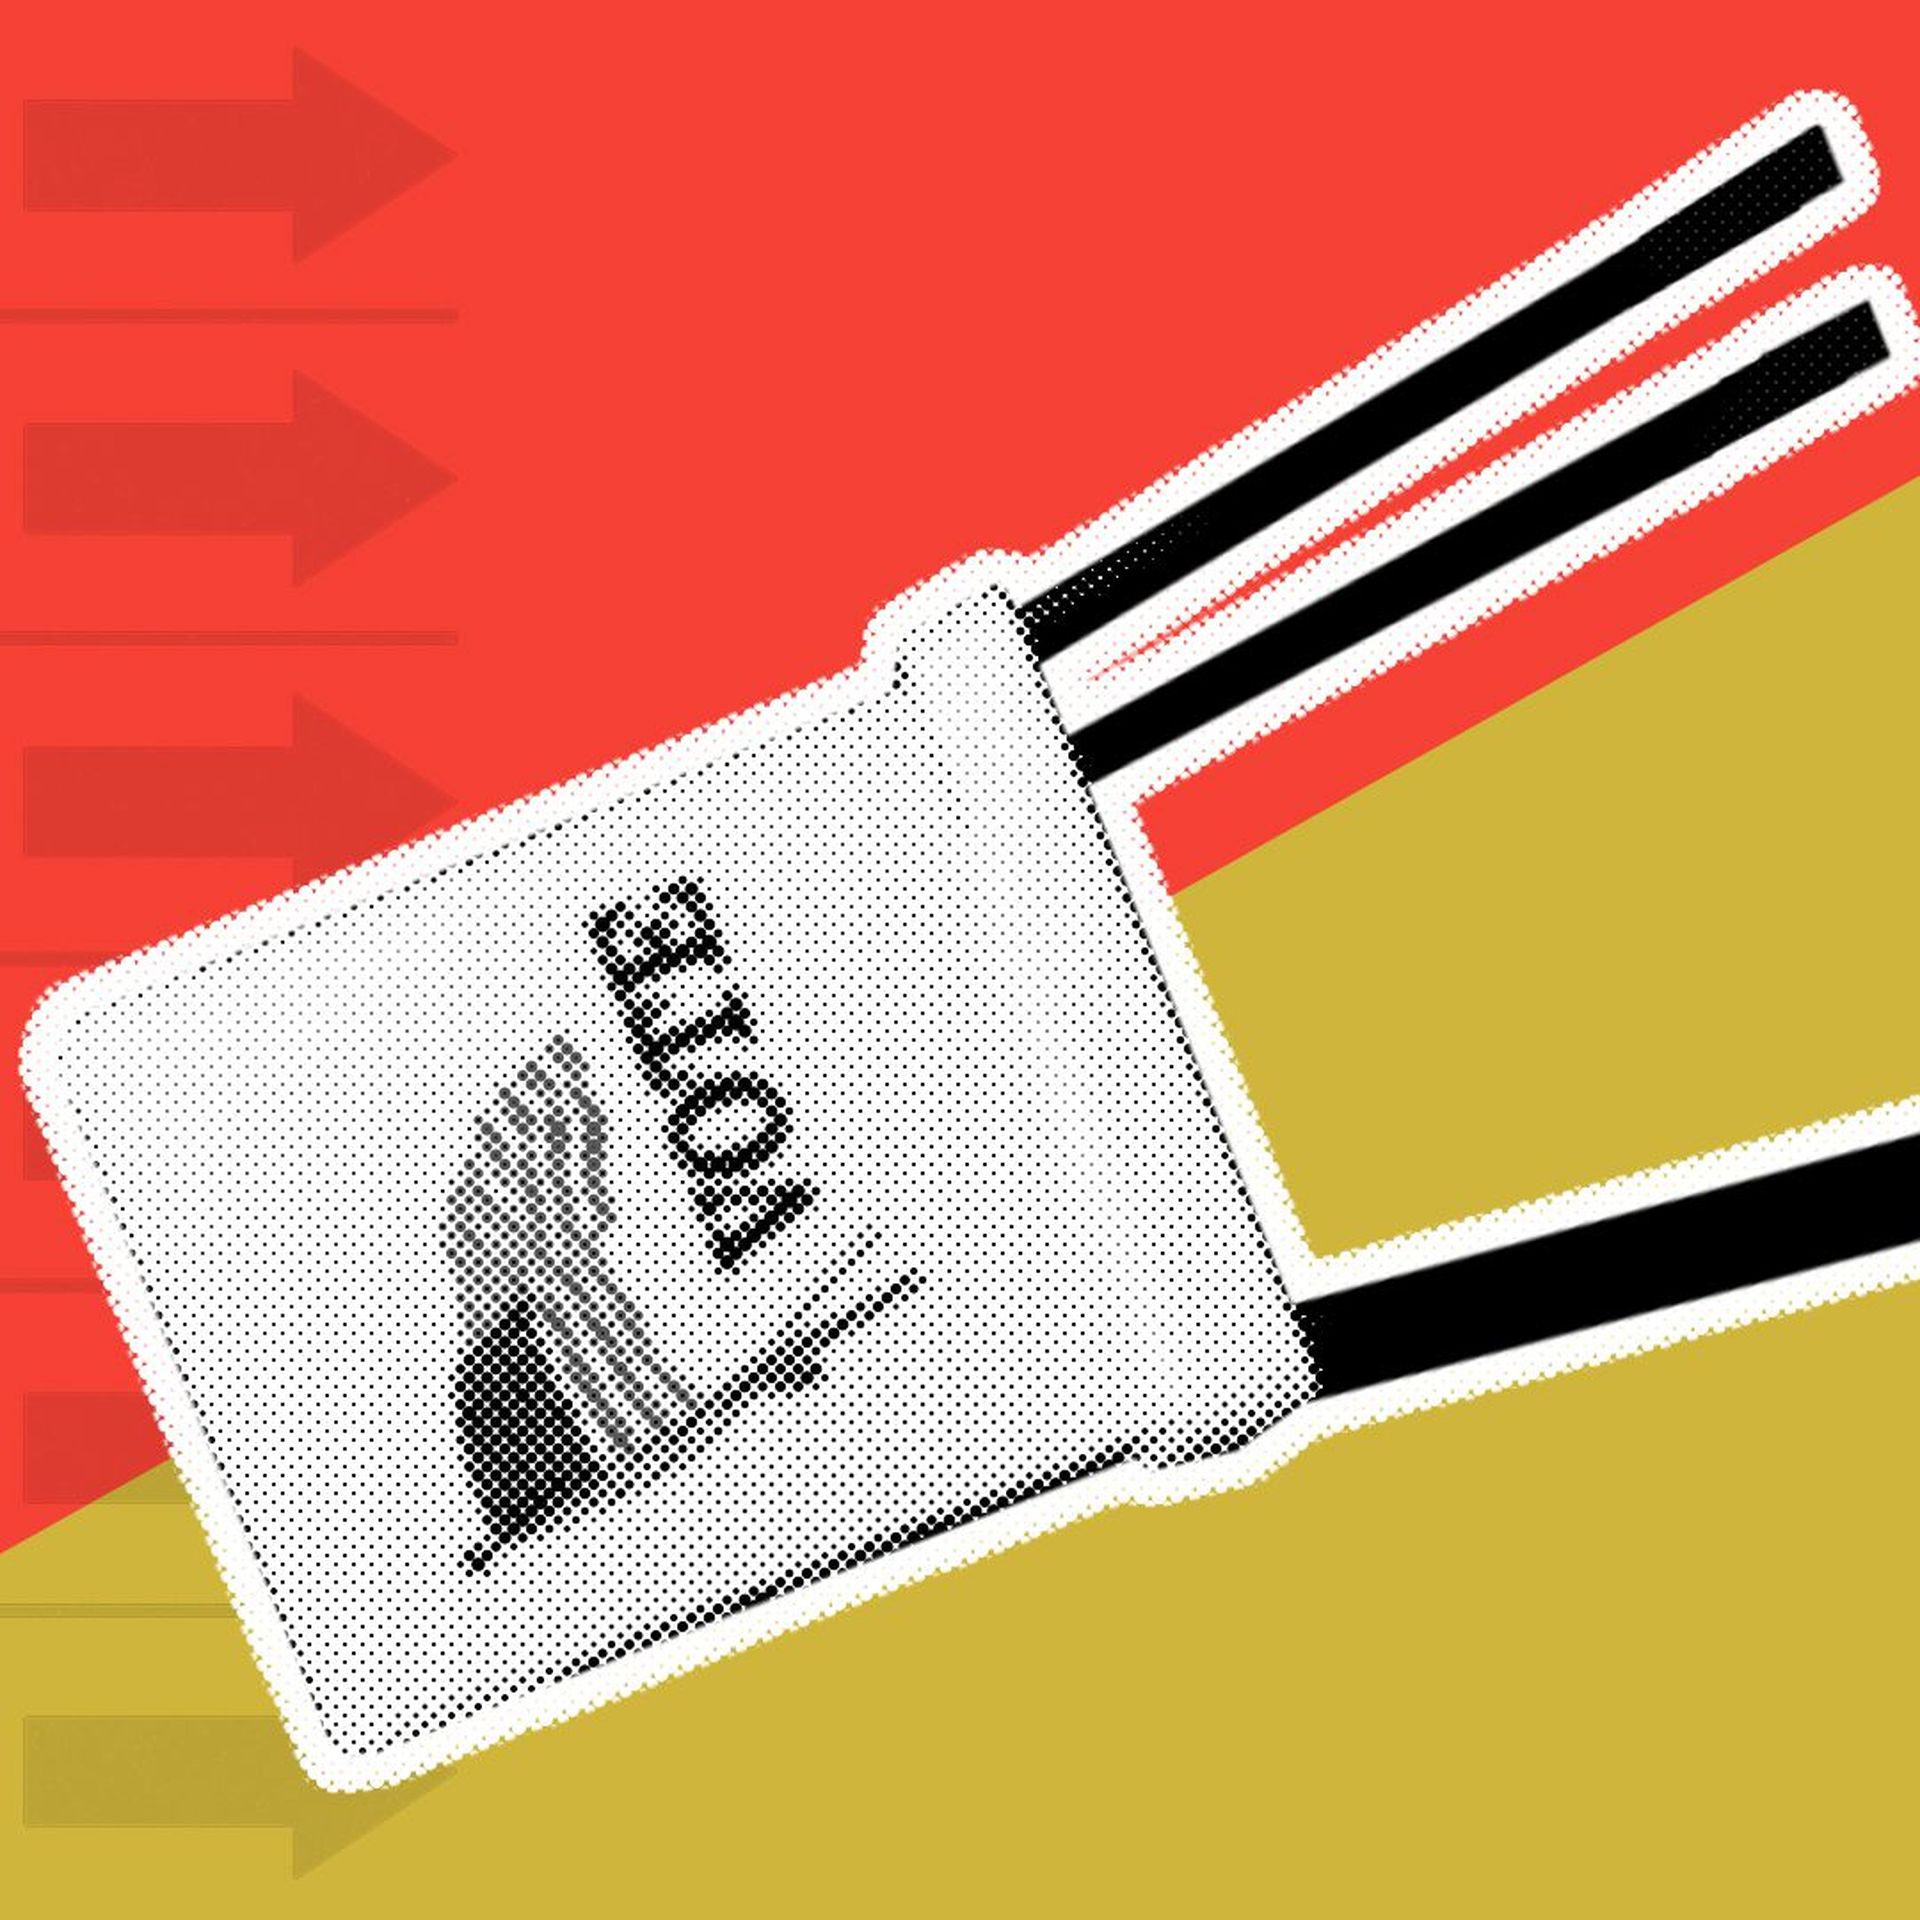 Illustration of a falling voting booth against a background with abstract ballot elements.